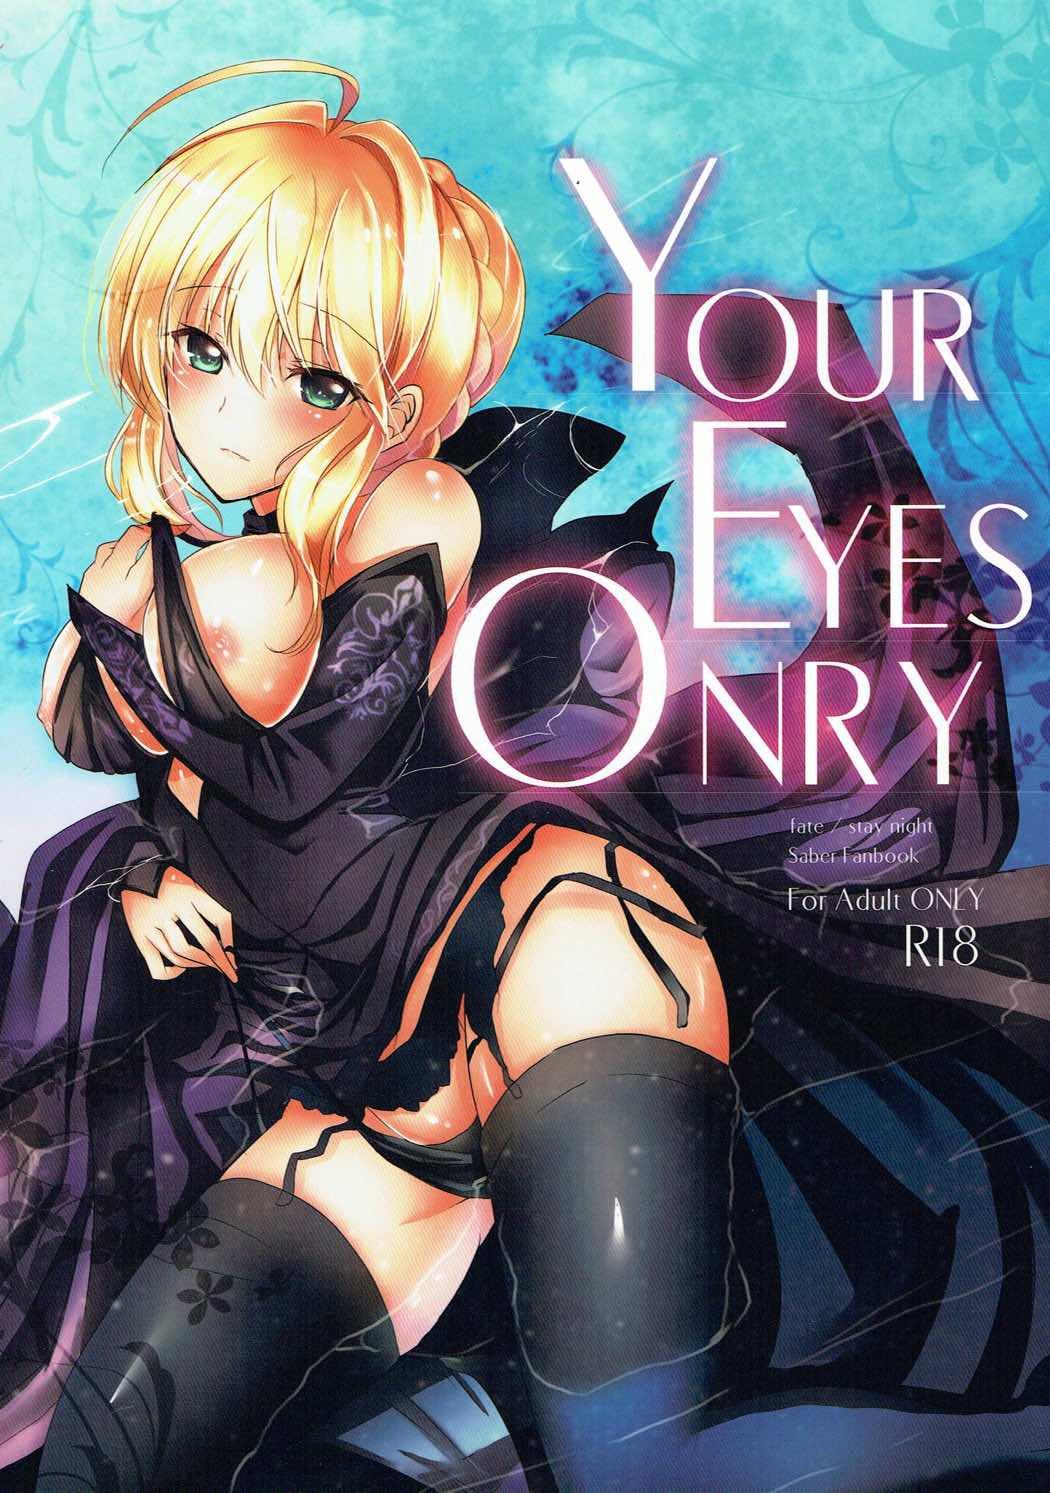 Plug YOUR EYES ONRY - Fate stay night Oral Porn - Picture 1